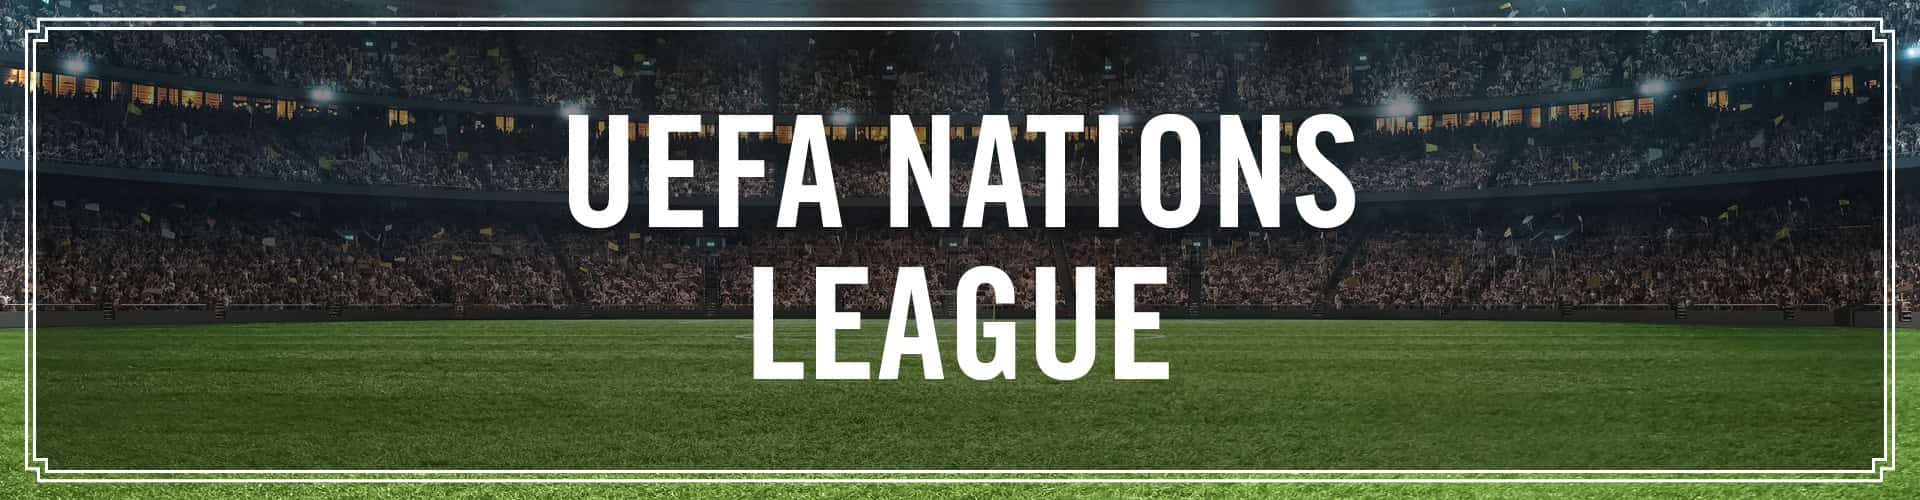 Pubs in Islington showing UEFA Nations League matches